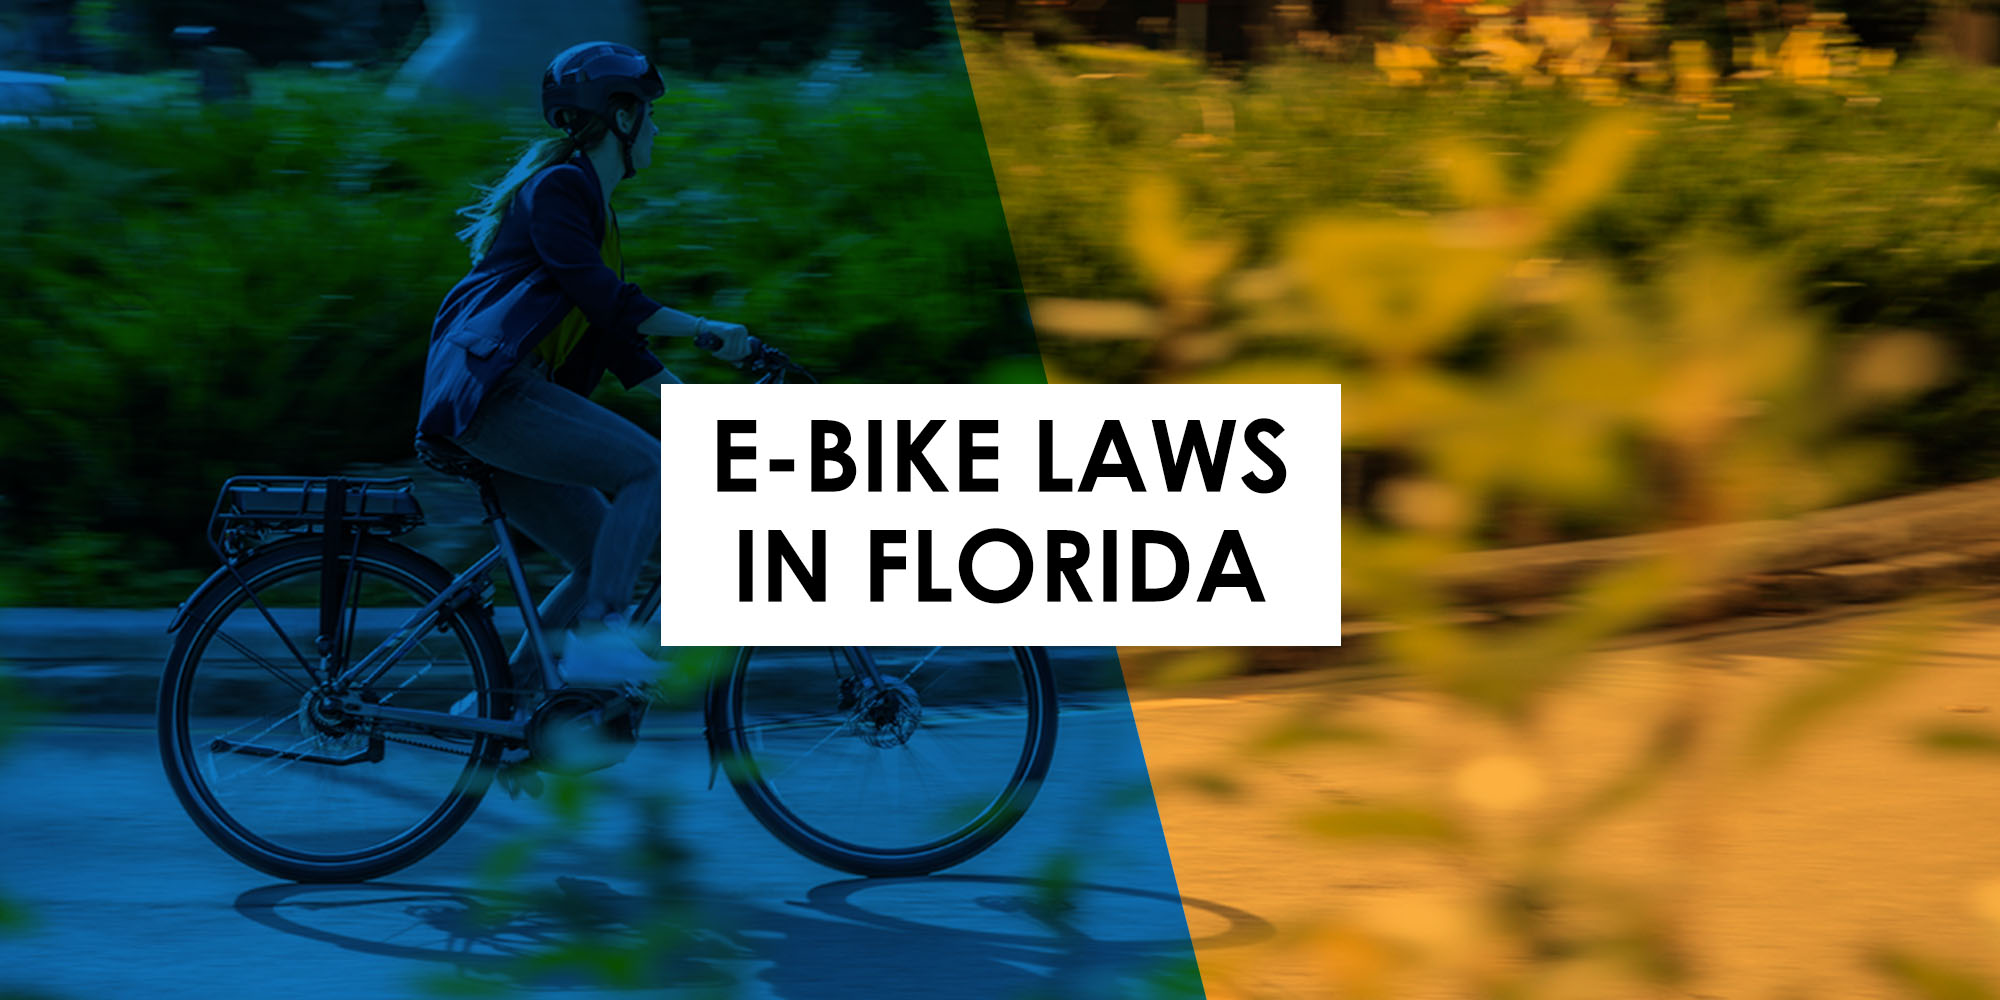 E-Bike Laws in Florida: What you need to know